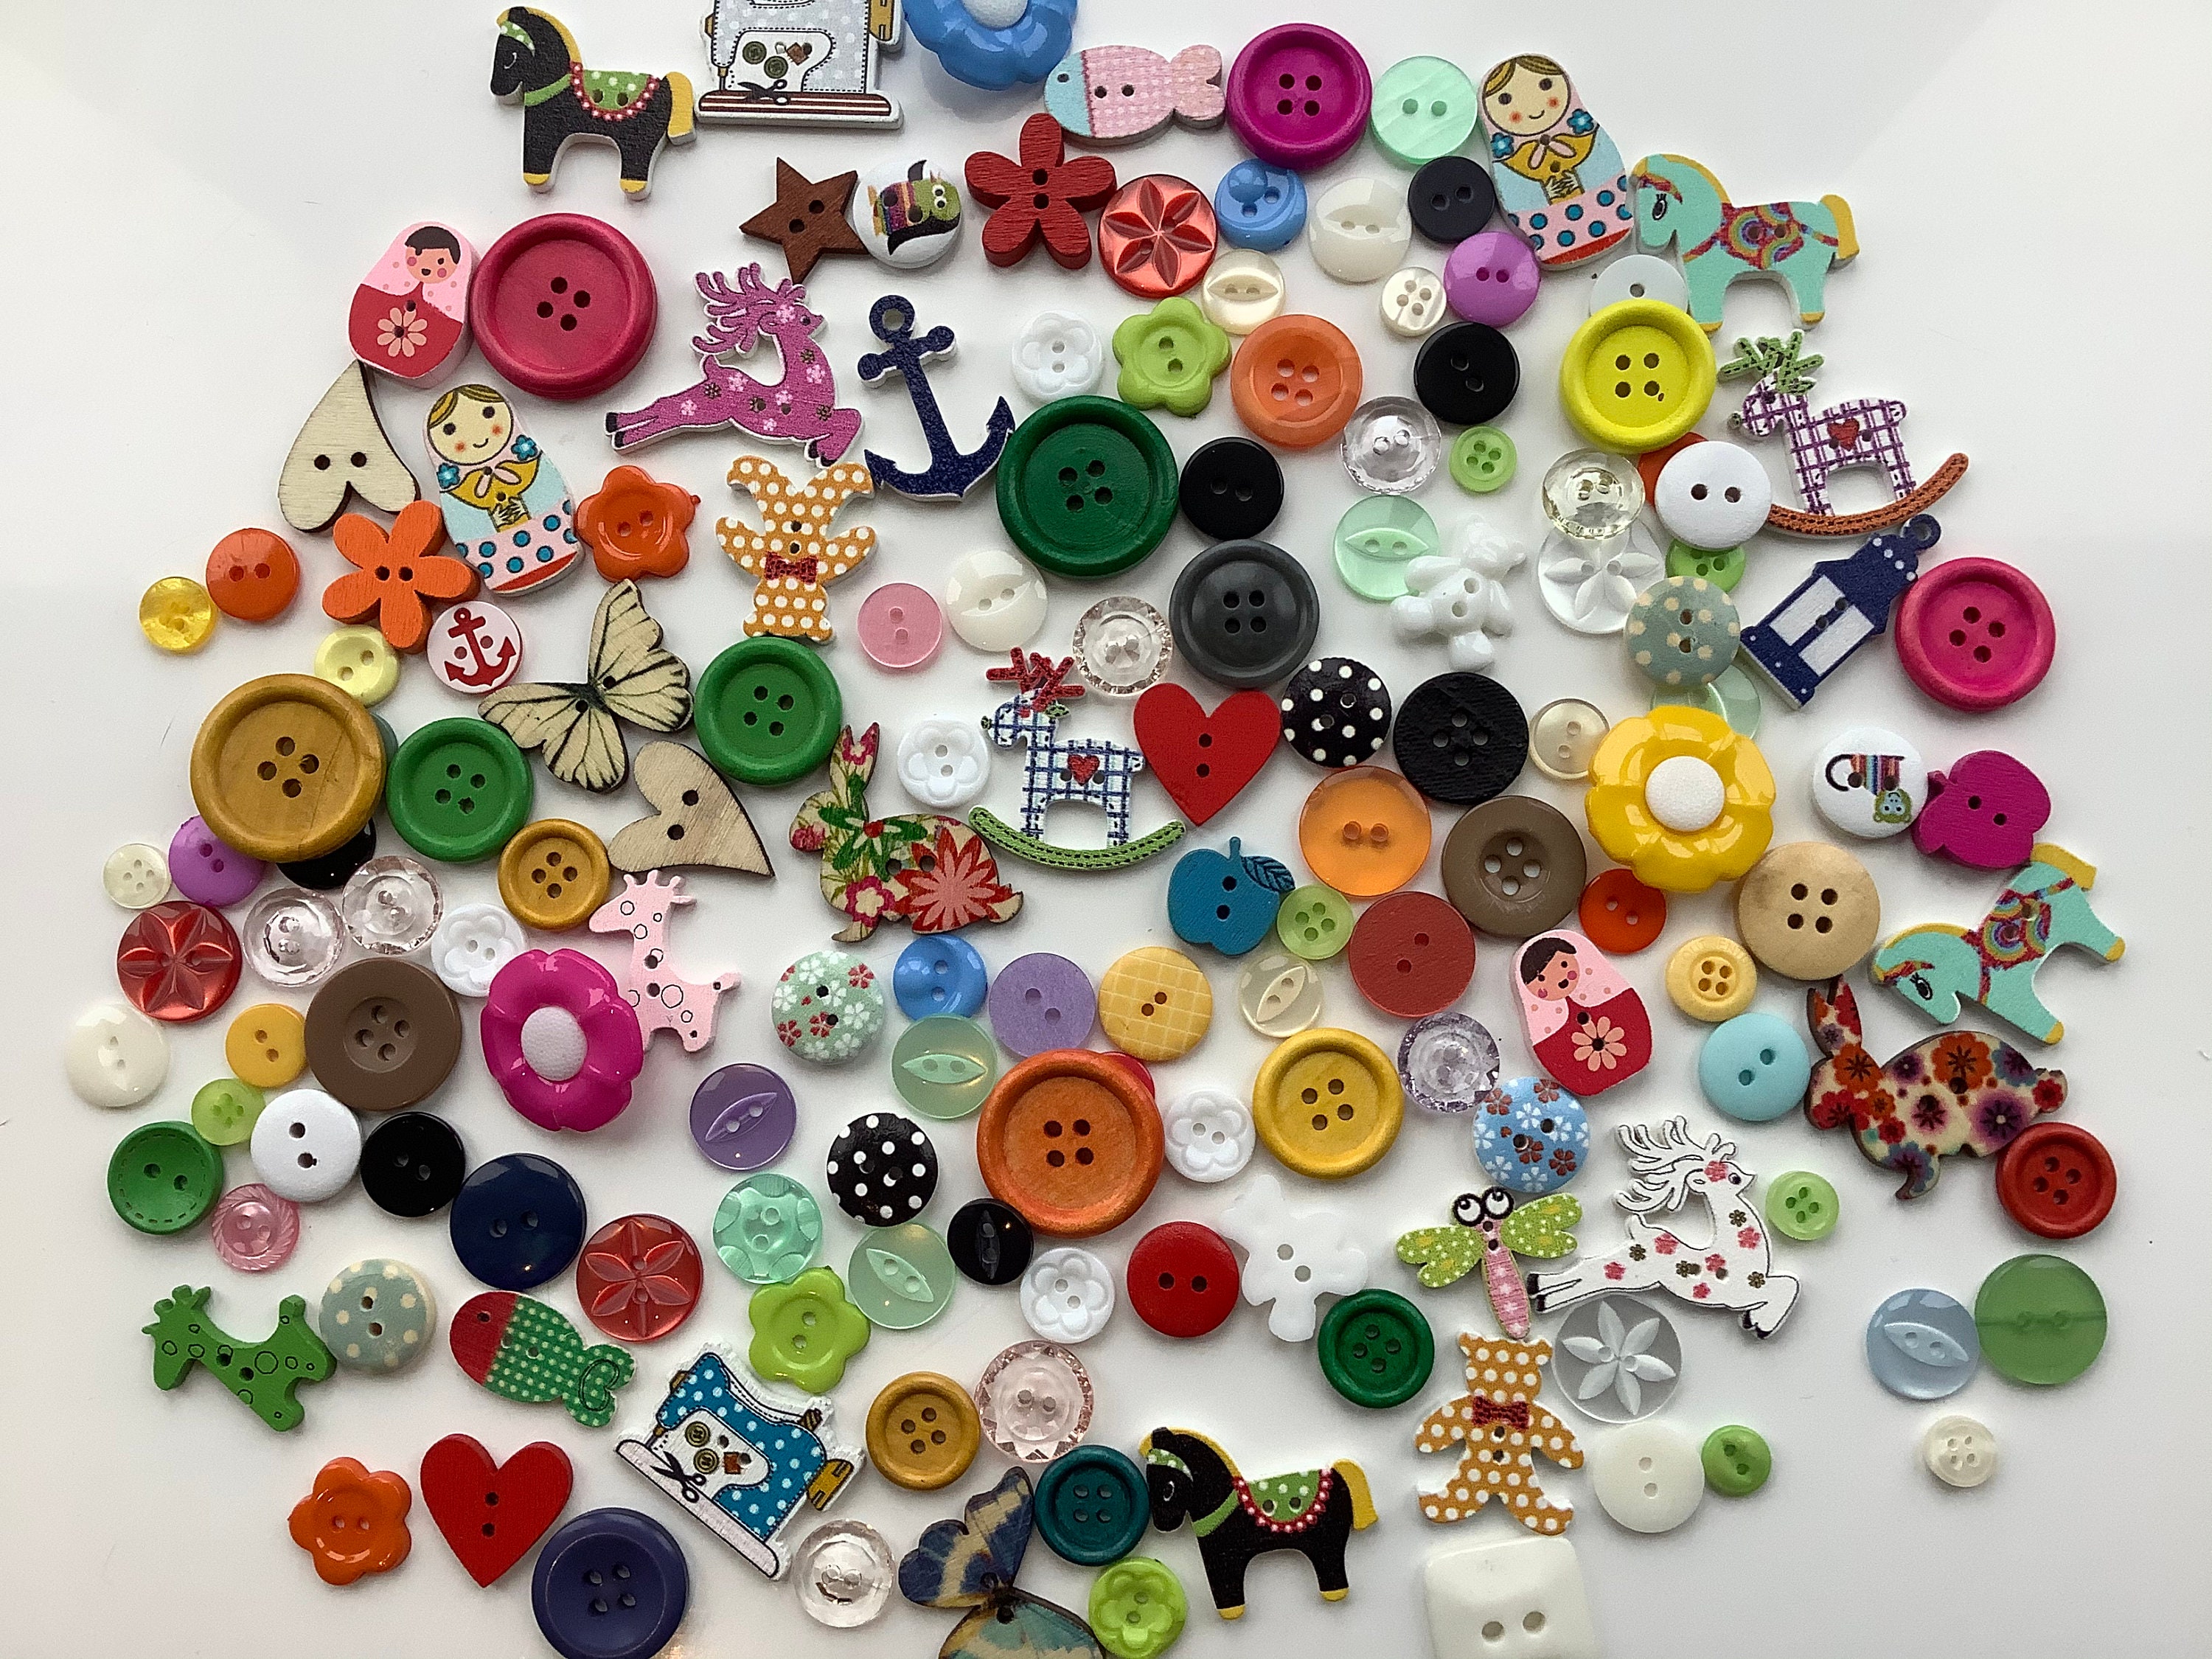 Buttons Galore and More Collection Round Novelty Buttons & Embellishments  Based on Variety of Themes, Holidays and Seasons for DIY Crafts